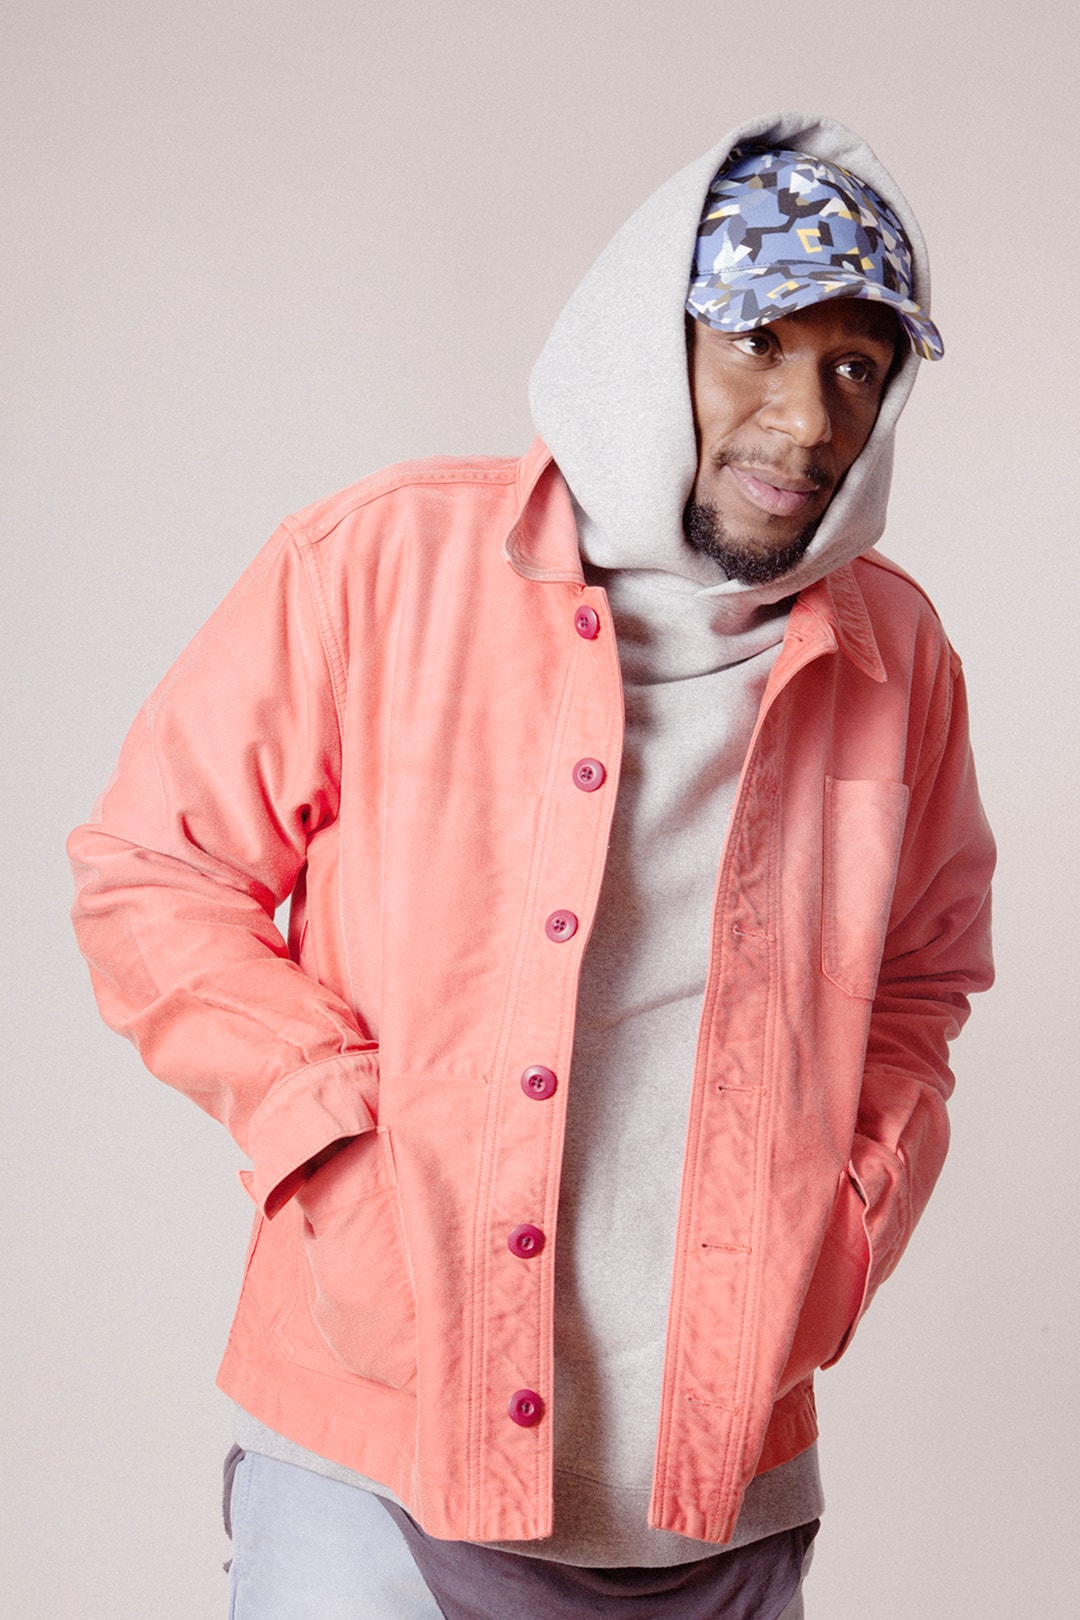 Union Los Angeles Debut Clothing Collection Fall/Winter 2017 Lookbook Yasiin Bey